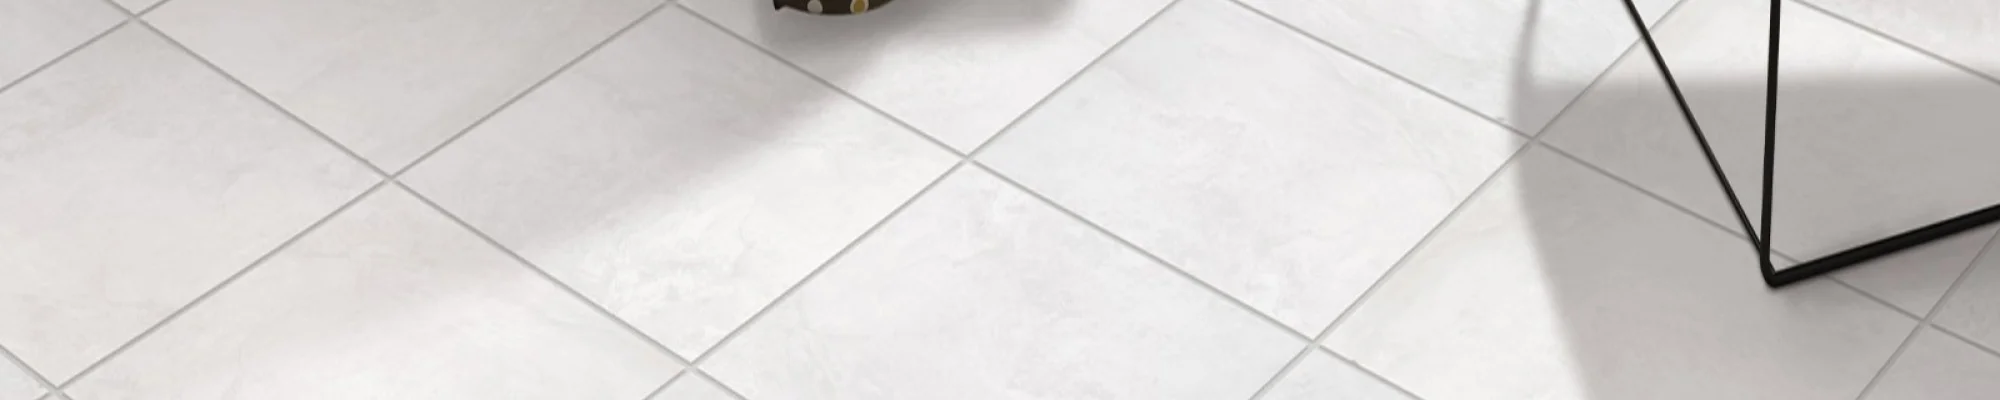 Ceramic care advice from Tiles in Style LLC - your local flooring store in South Holland, IL